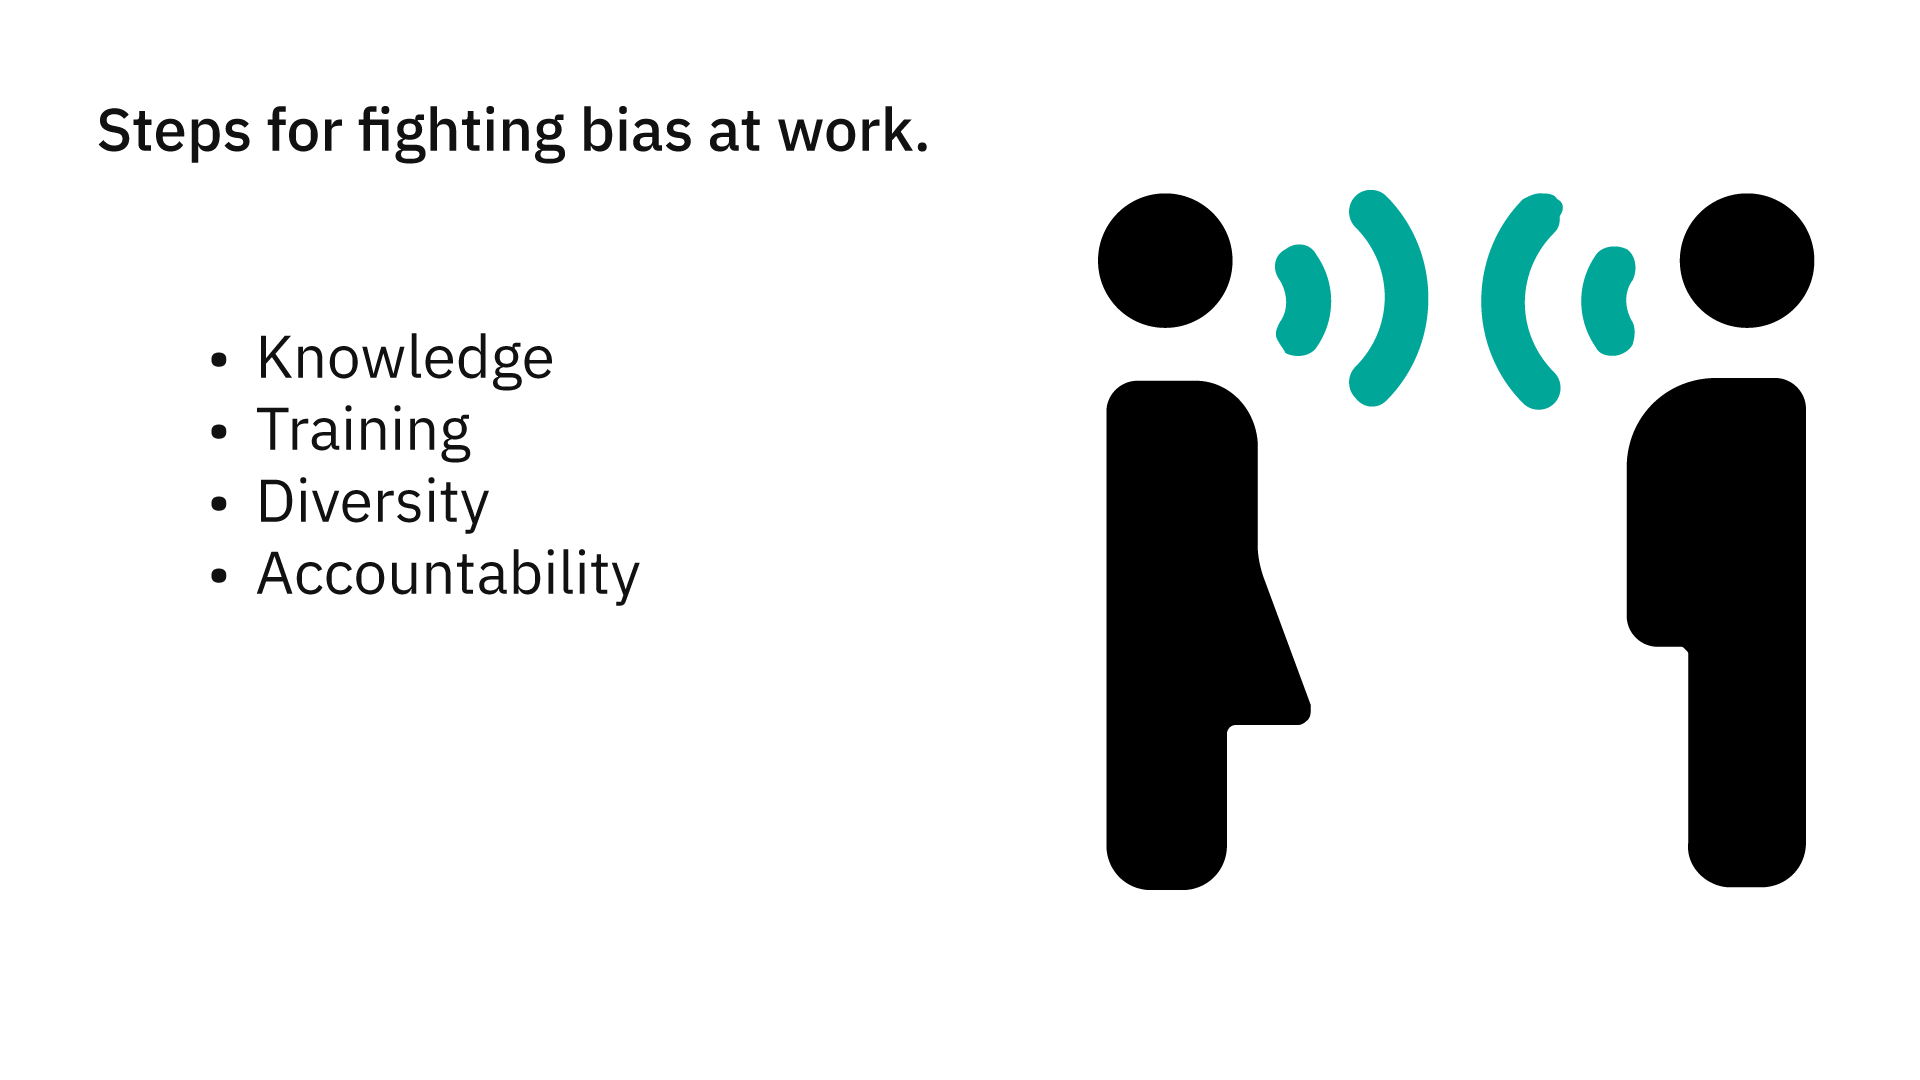 How to tackle bias